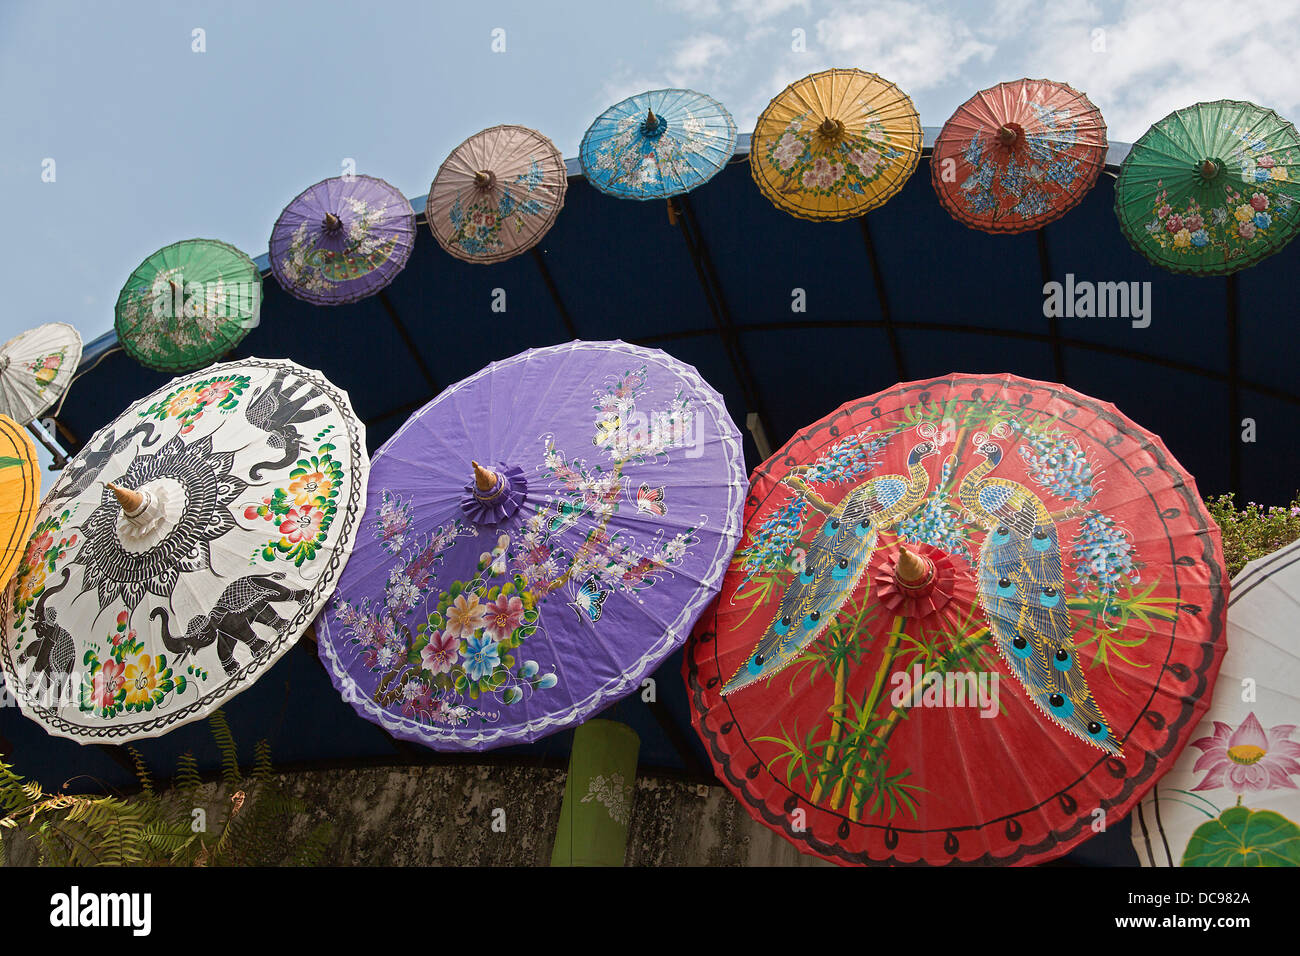 Brightly painted Asian sun umbrellas made of paper Stock Photo